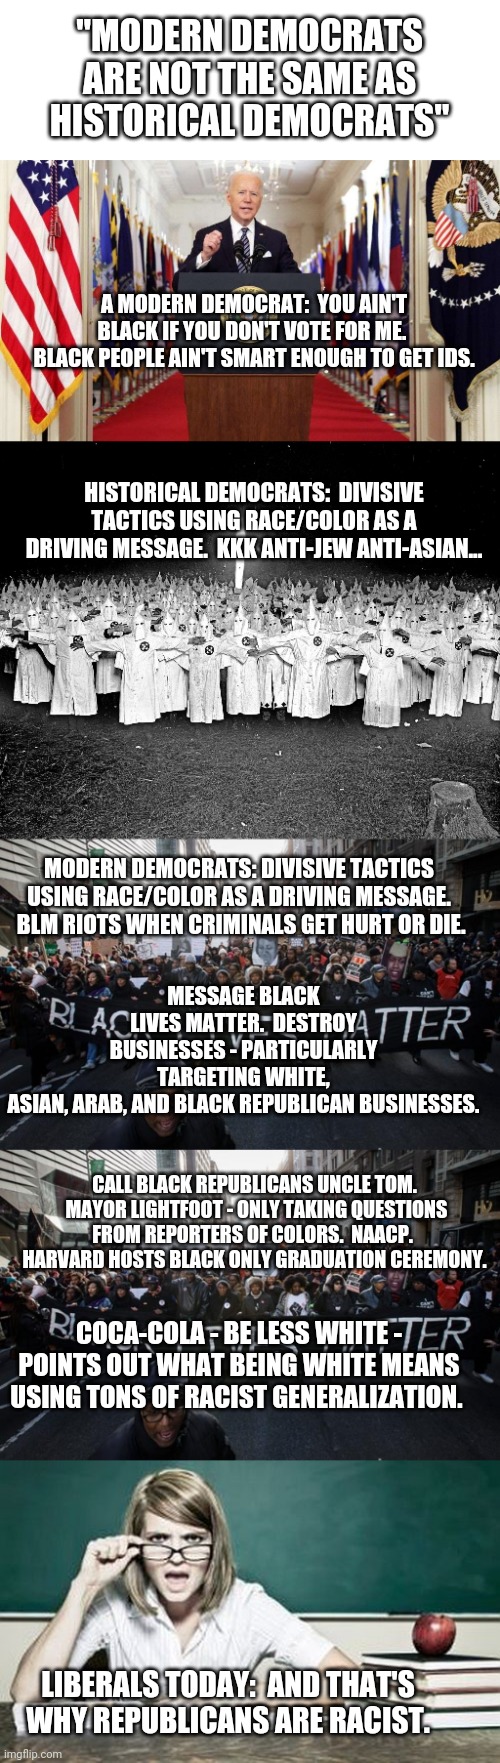 To my fellow Democrats: Y'all need to get a clue | "MODERN DEMOCRATS ARE NOT THE SAME AS HISTORICAL DEMOCRATS"; A MODERN DEMOCRAT:  YOU AIN'T BLACK IF YOU DON'T VOTE FOR ME.  BLACK PEOPLE AIN'T SMART ENOUGH TO GET IDS. HISTORICAL DEMOCRATS:  DIVISIVE TACTICS USING RACE/COLOR AS A DRIVING MESSAGE.  KKK ANTI-JEW ANTI-ASIAN... MODERN DEMOCRATS: DIVISIVE TACTICS USING RACE/COLOR AS A DRIVING MESSAGE.  BLM RIOTS WHEN CRIMINALS GET HURT OR DIE. MESSAGE BLACK LIVES MATTER.  DESTROY BUSINESSES - PARTICULARLY TARGETING WHITE, ASIAN, ARAB, AND BLACK REPUBLICAN BUSINESSES. CALL BLACK REPUBLICANS UNCLE TOM.  MAYOR LIGHTFOOT - ONLY TAKING QUESTIONS FROM REPORTERS OF COLORS.  NAACP.  HARVARD HOSTS BLACK ONLY GRADUATION CEREMONY. COCA-COLA - BE LESS WHITE - POINTS OUT WHAT BEING WHITE MEANS USING TONS OF RACIST GENERALIZATION. LIBERALS TODAY:  AND THAT'S WHY REPUBLICANS ARE RACIST. | image tagged in joe biden speech,kkk religion,black lives matter,teacher | made w/ Imgflip meme maker